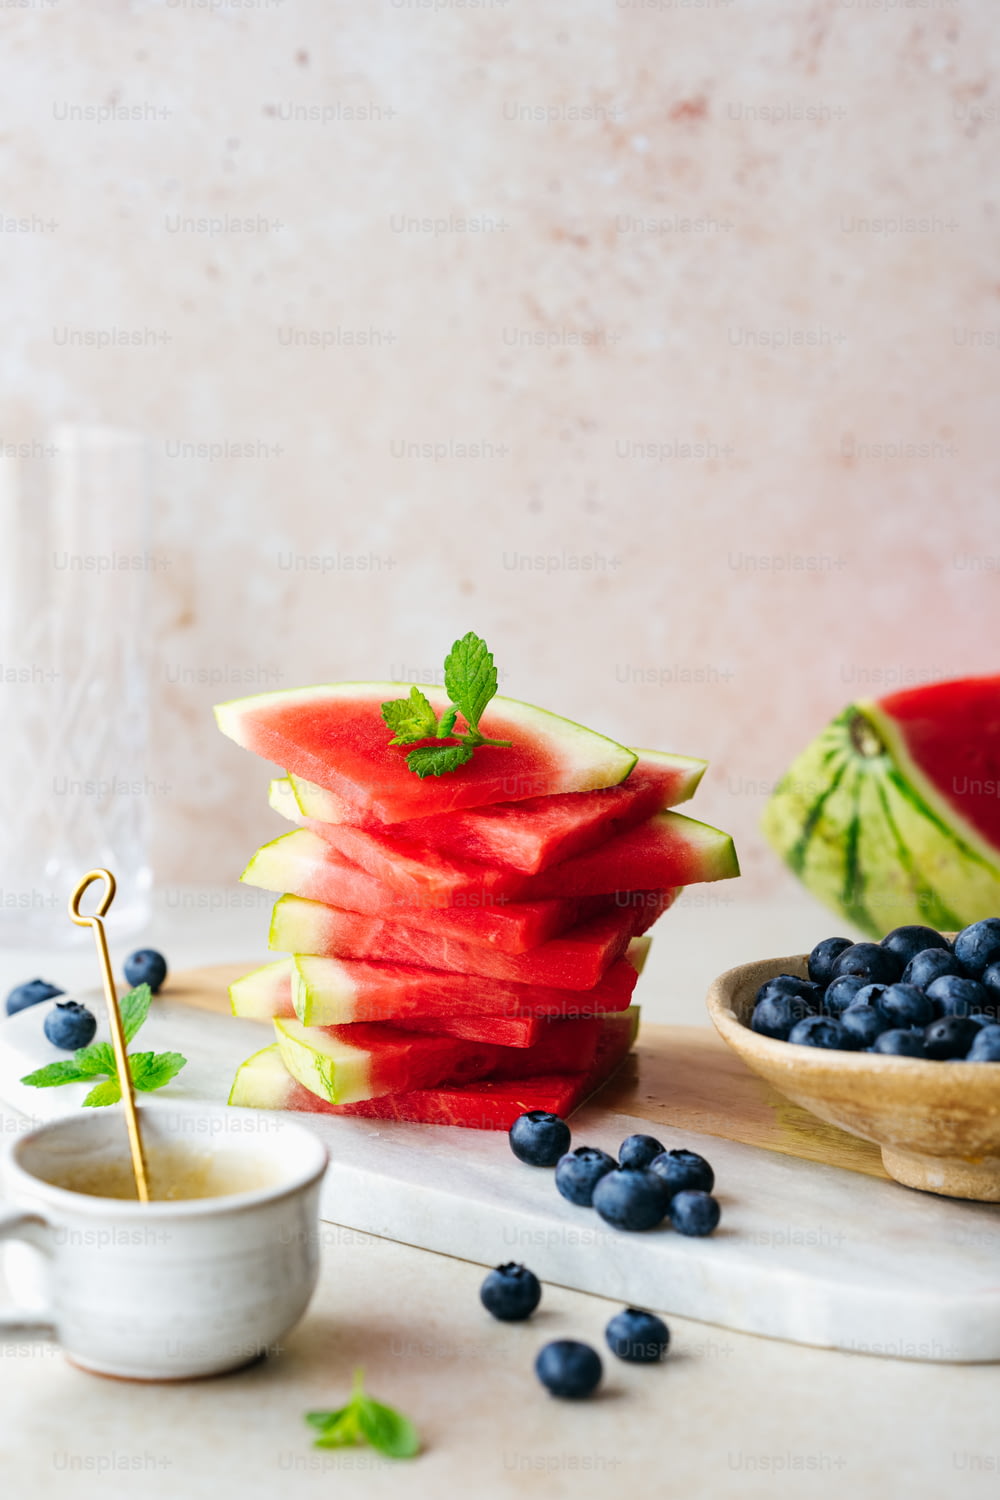 watermelon slices, blueberries, and mint are arranged on a table